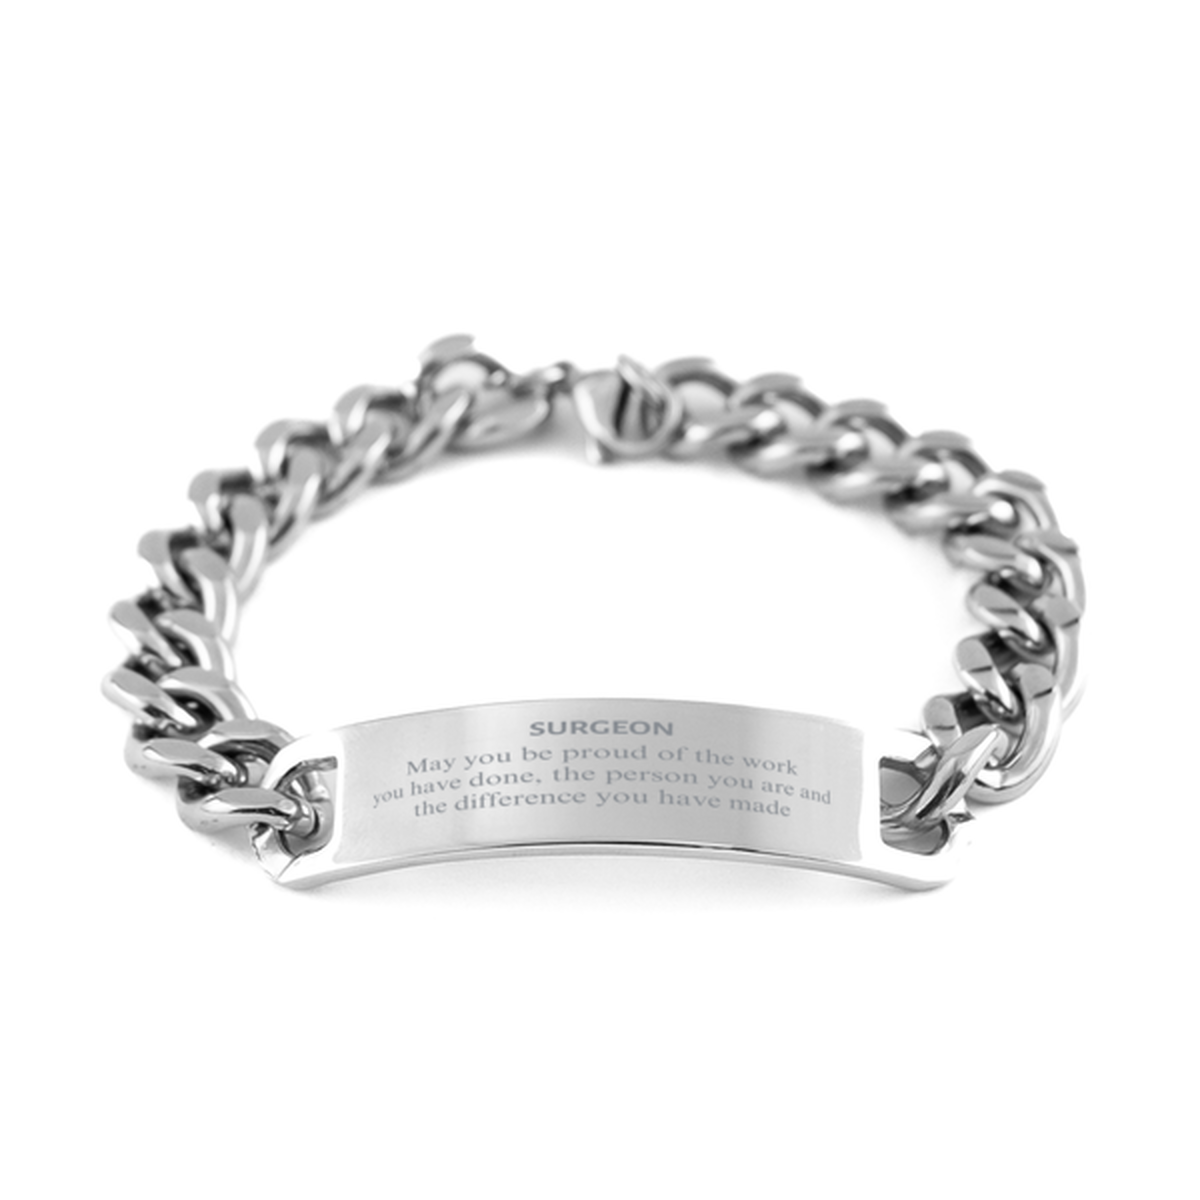 Surgeon May you be proud of the work you have done, Retirement Surgeon Cuban Chain Stainless Steel Bracelet for Colleague Appreciation Gifts Amazing for Surgeon